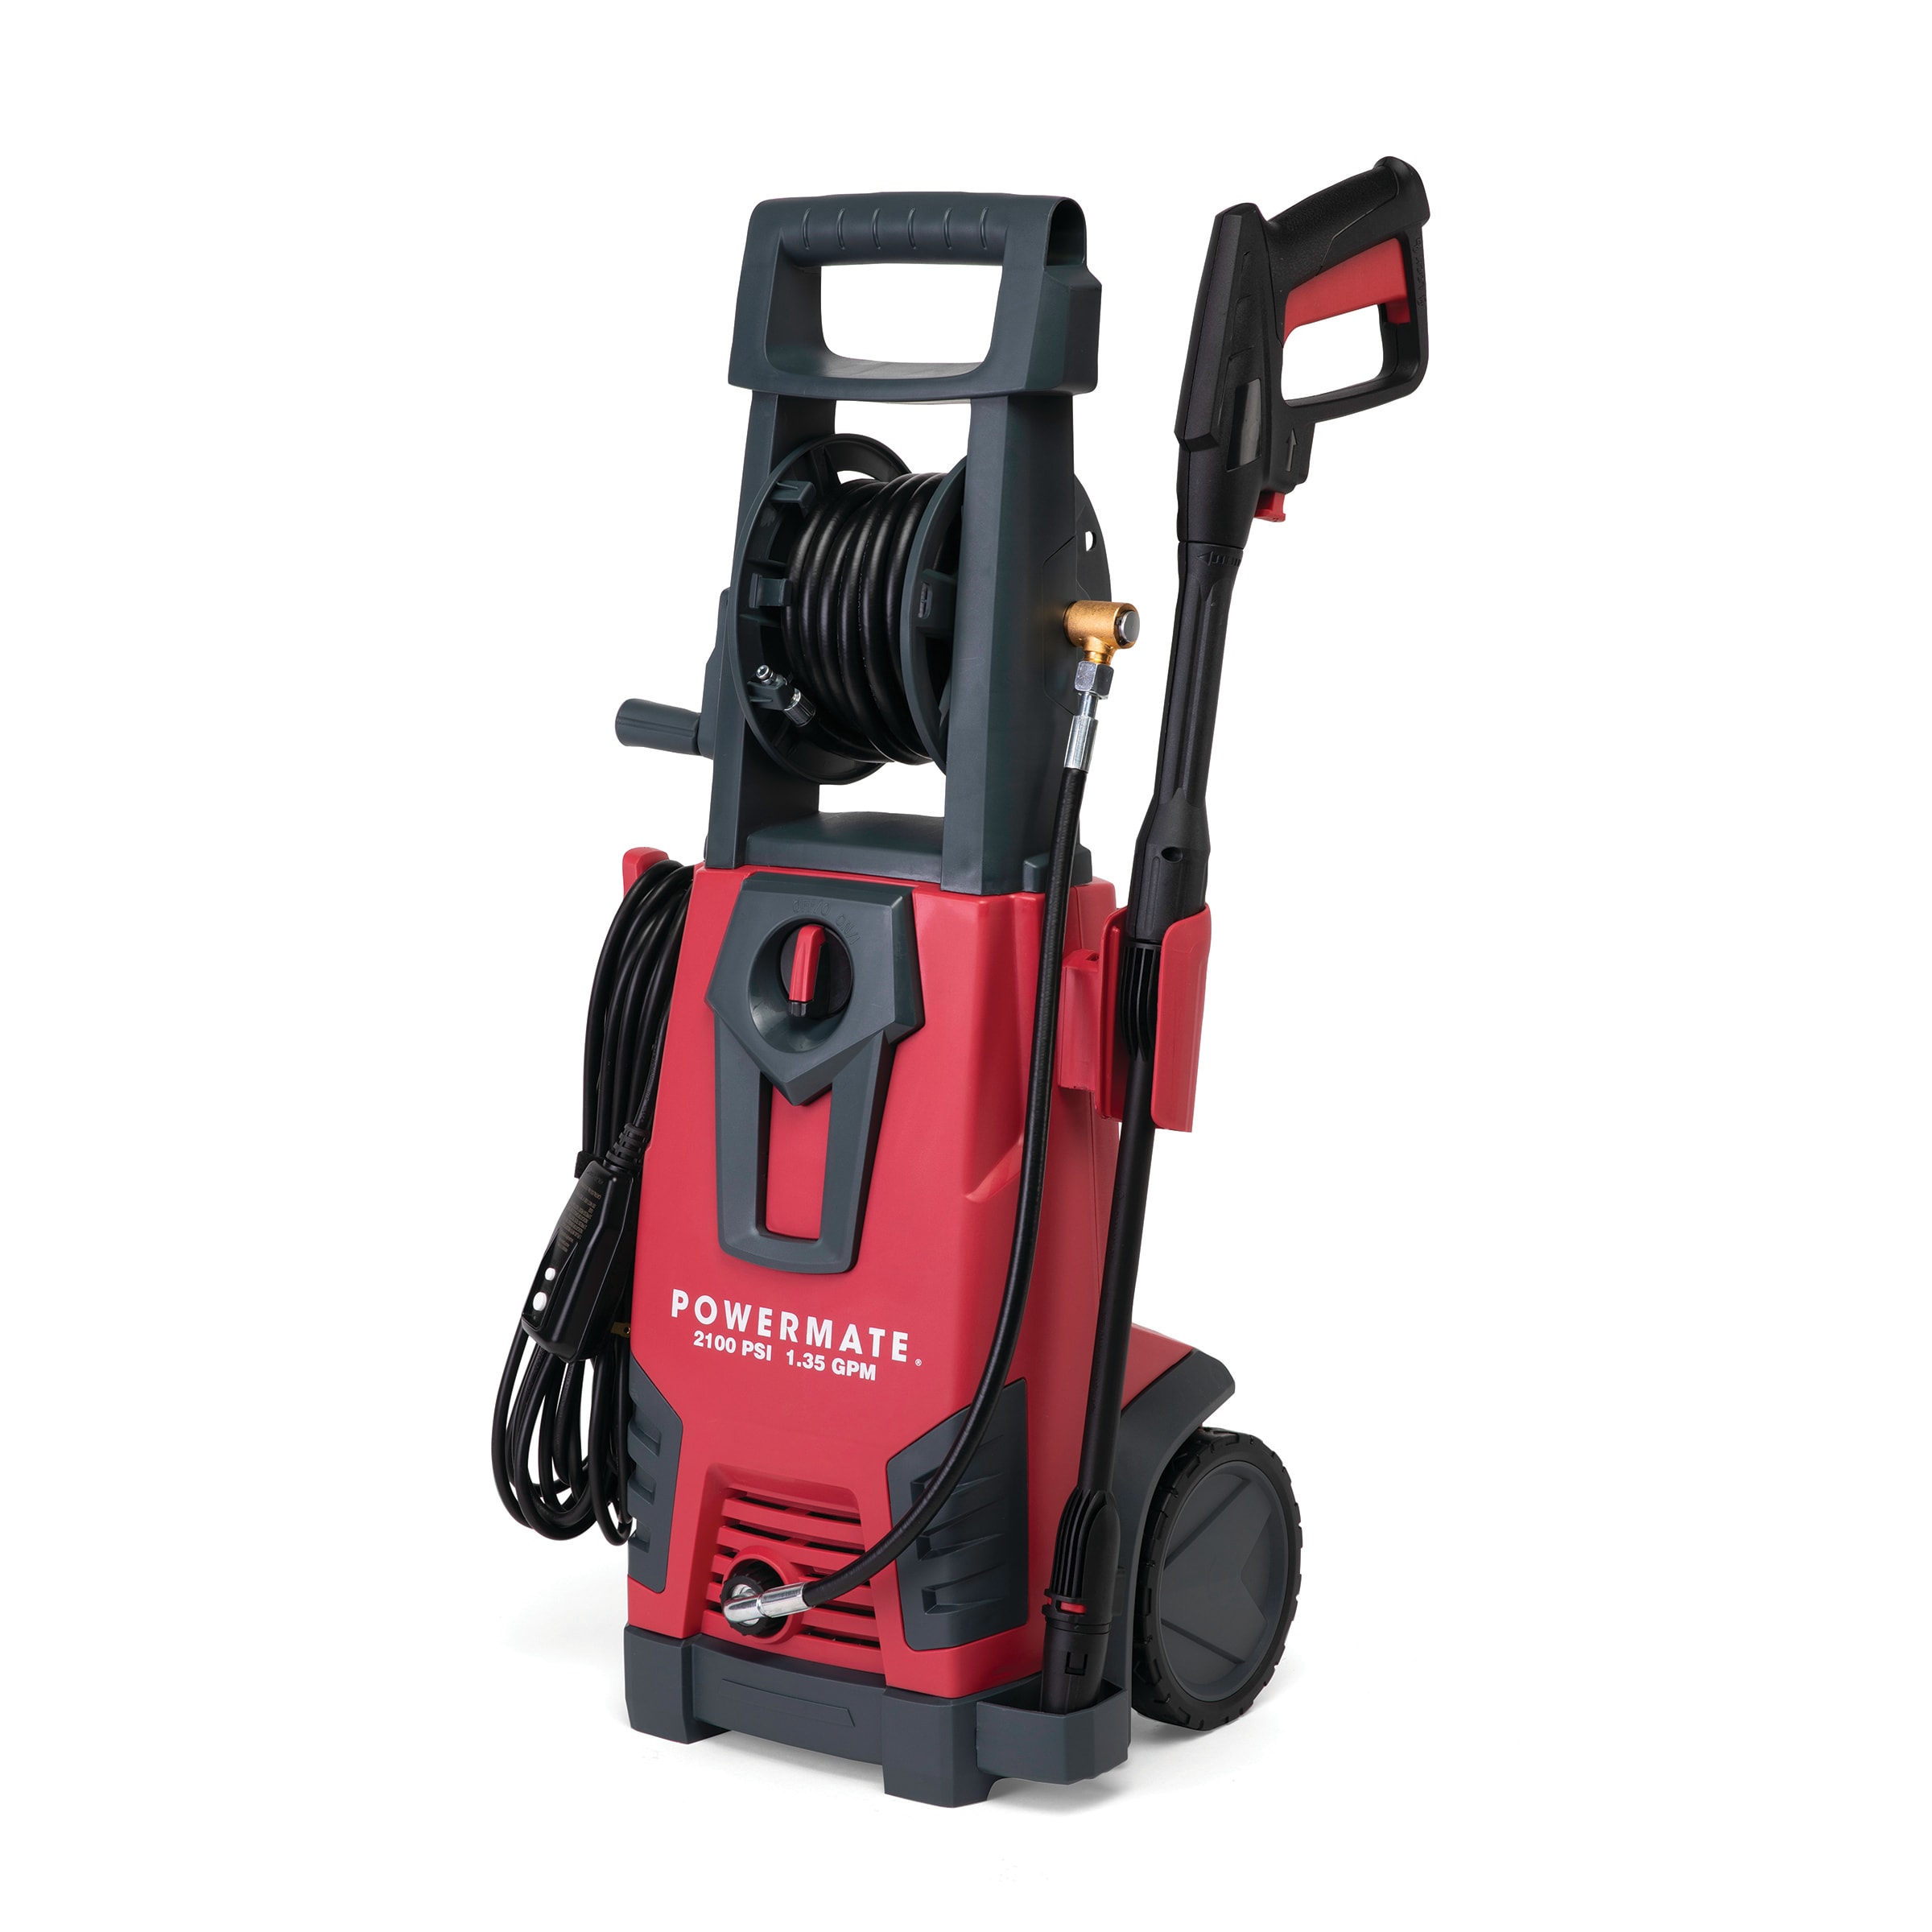 Powermate 2100 PSI 1.35- Gallons-GPM Cold Water Electric Pressure Washer